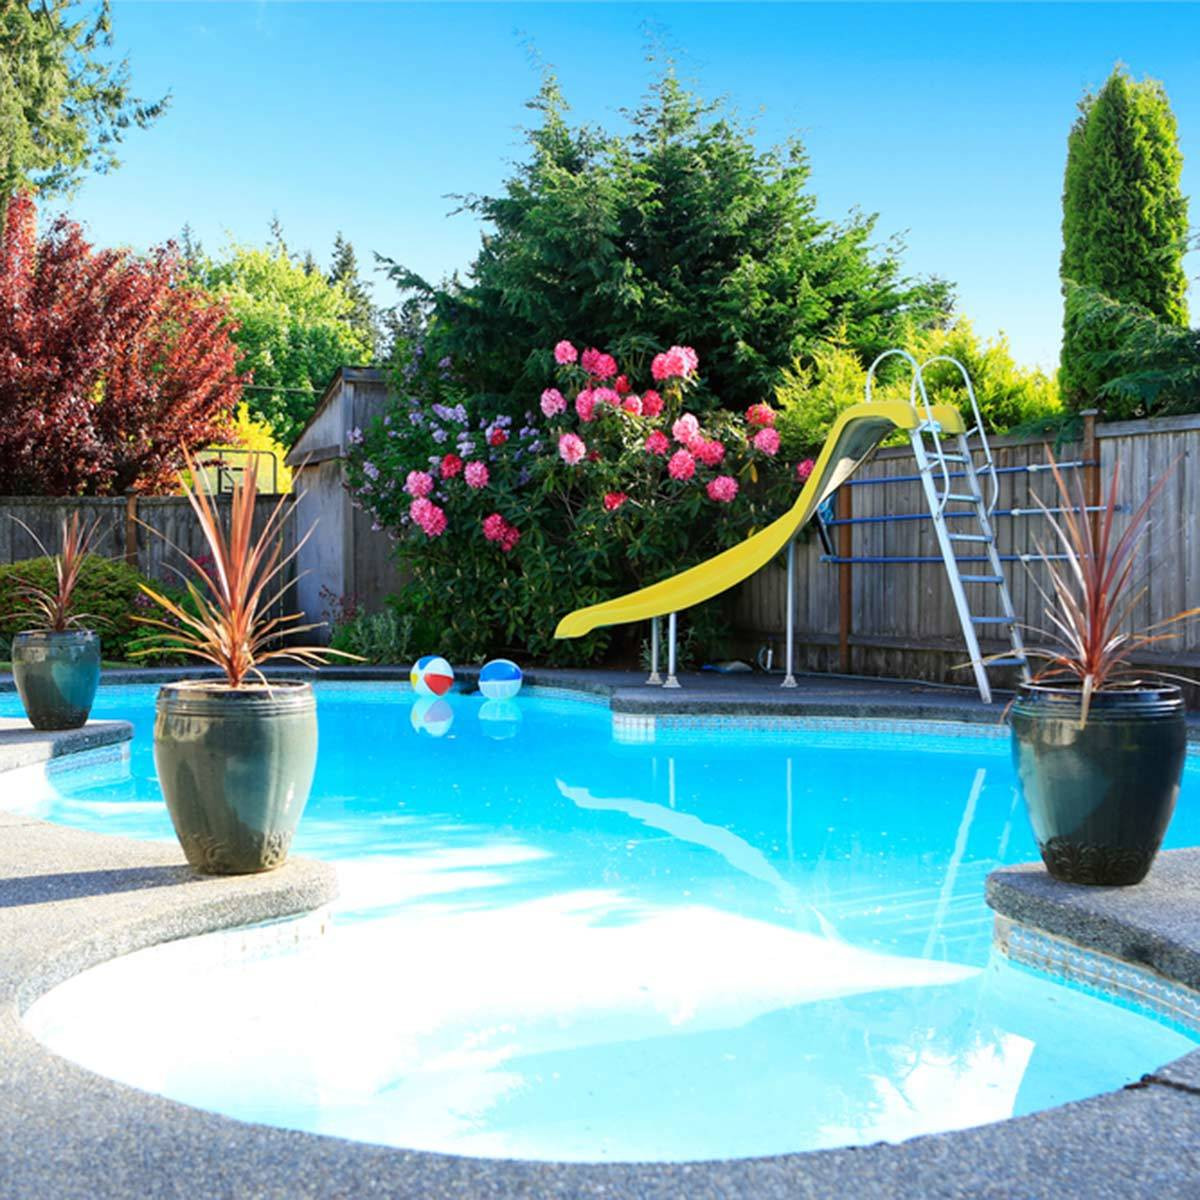 Pictures Of Backyard Pools
 10 Best Backyard Pool Ideas and Designs